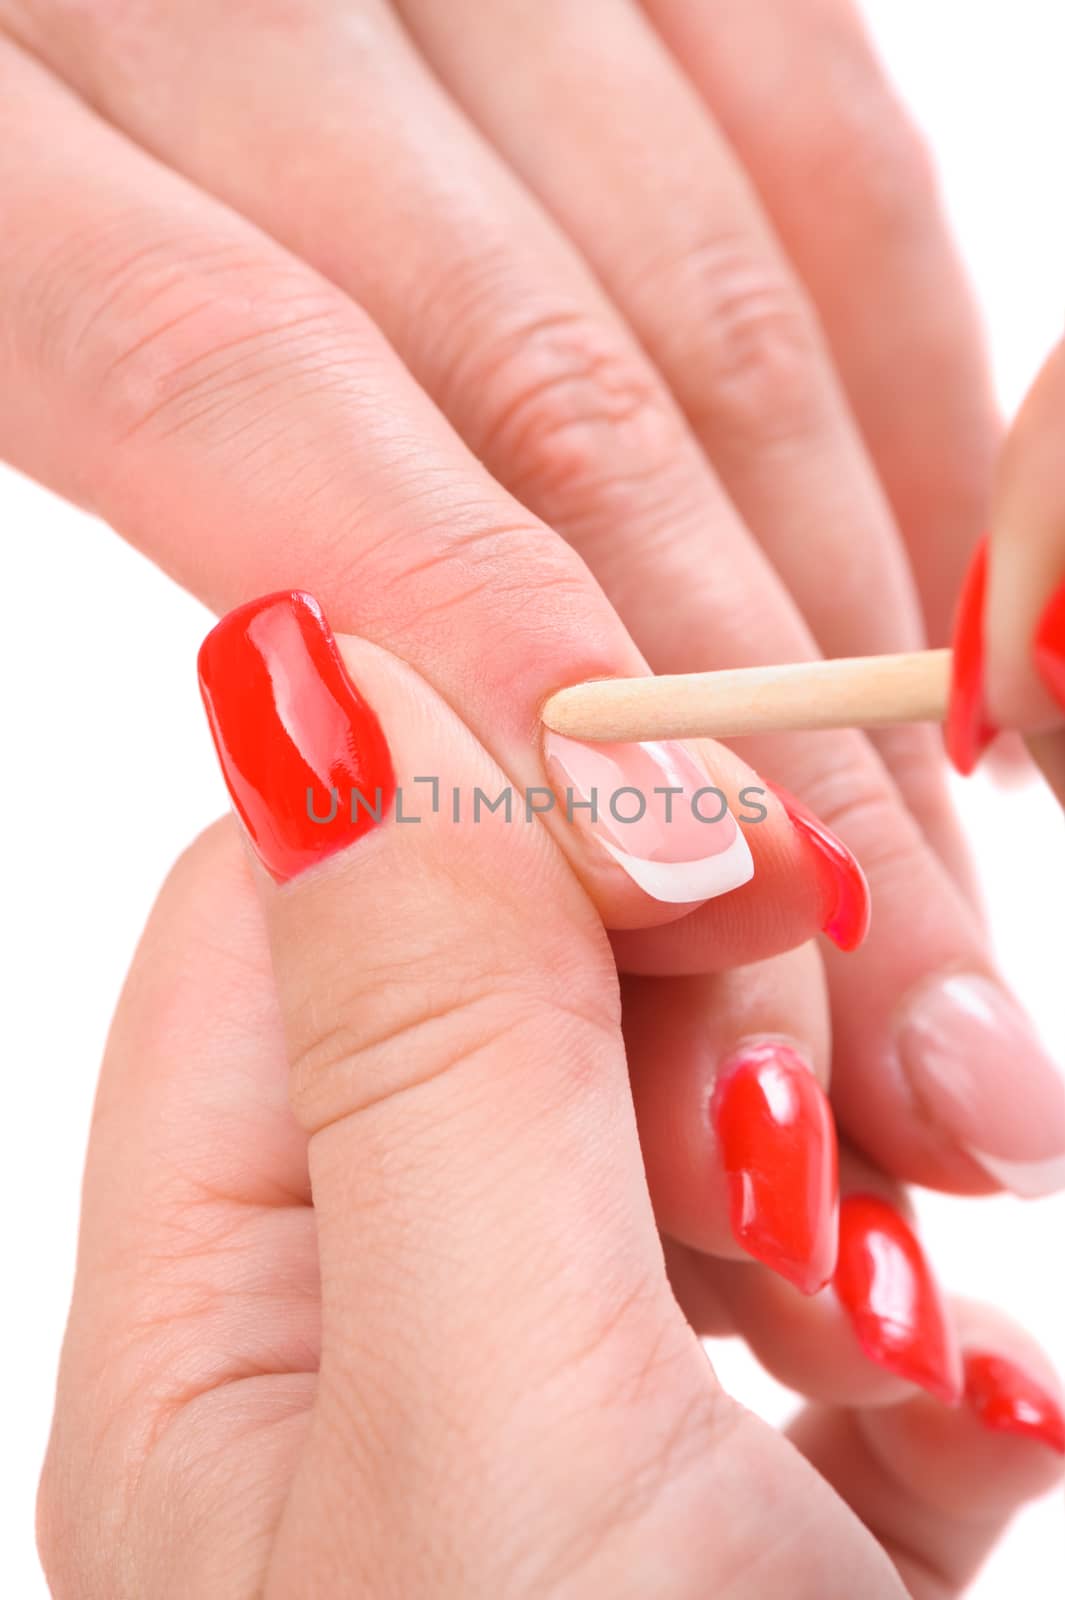 manicure applying - cleaning the cuticles  by starush